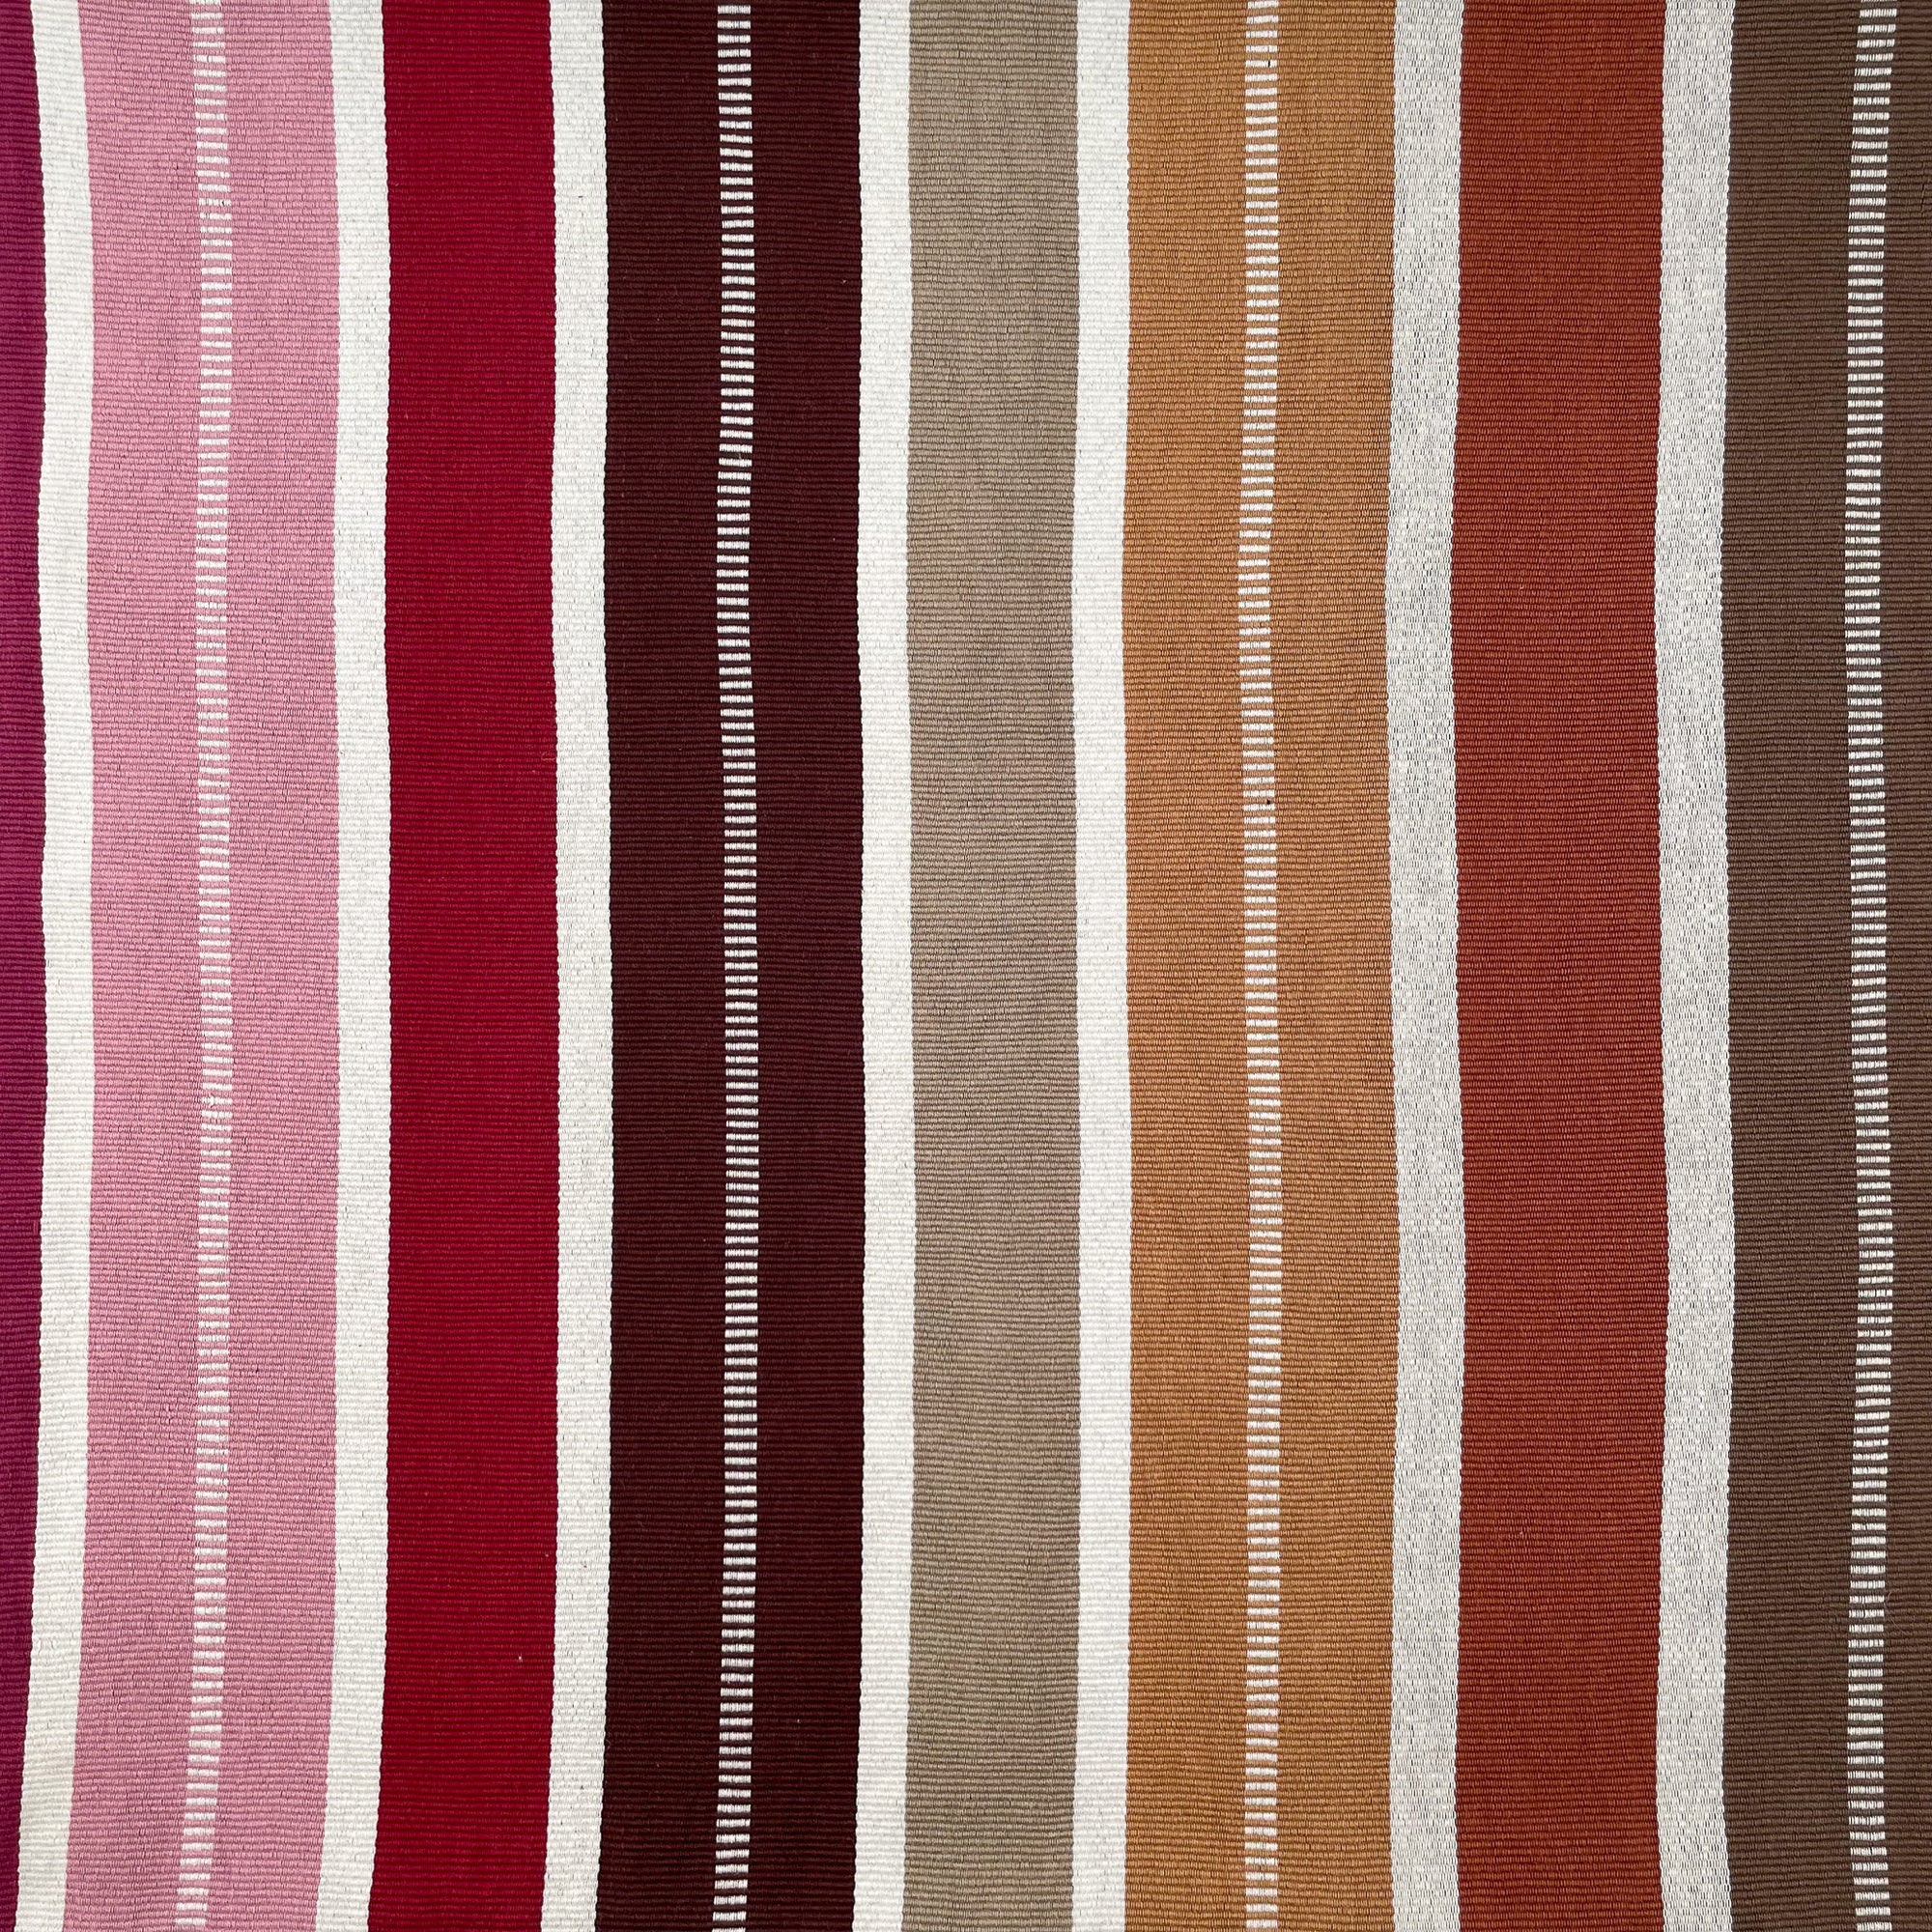 Front view of cushion with colorful stripes grading from pink to red to shades of brown, with colorful cinta tag